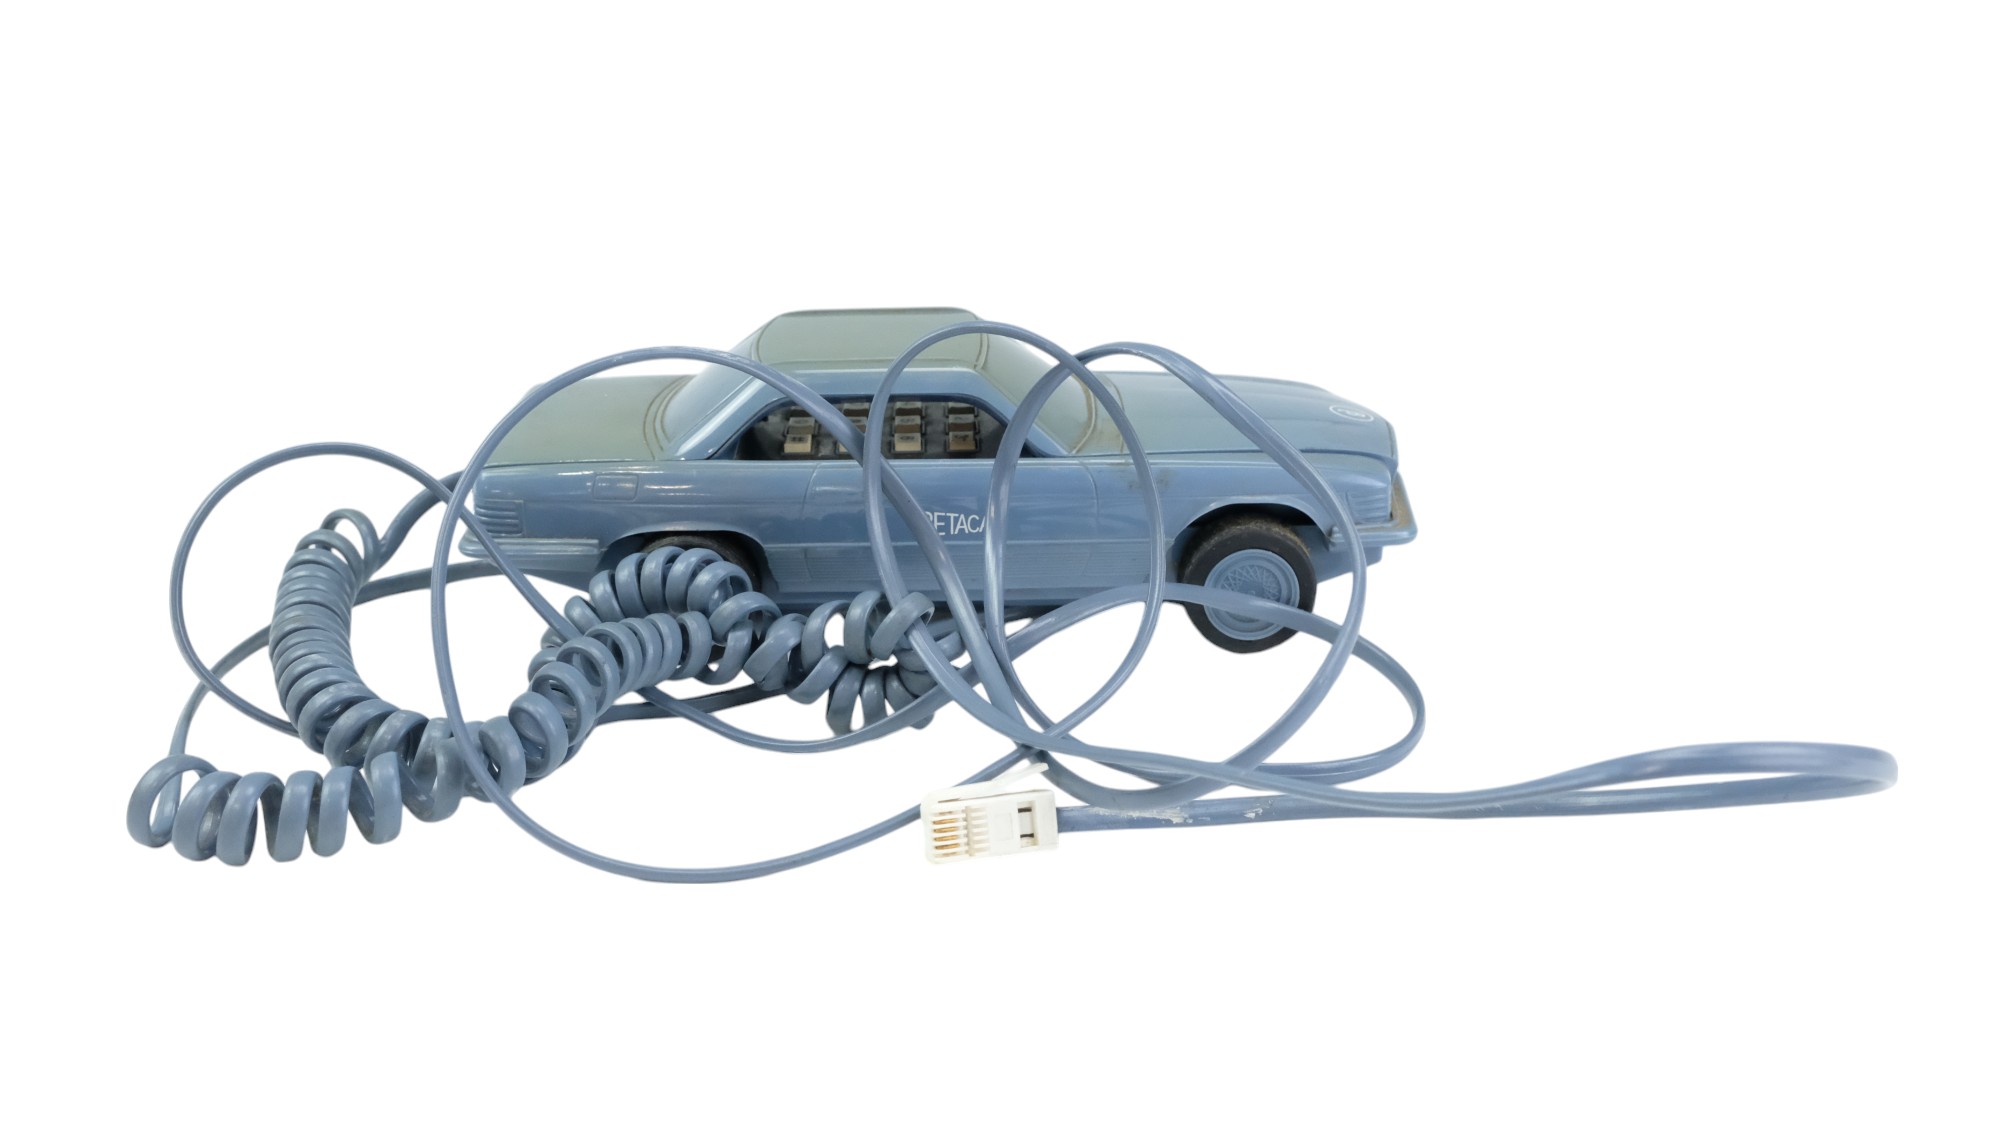 A 1980s Betacom Betacar novelty telephone modelled as a car, 22 x 9.5 x 7 cm - Image 5 of 5